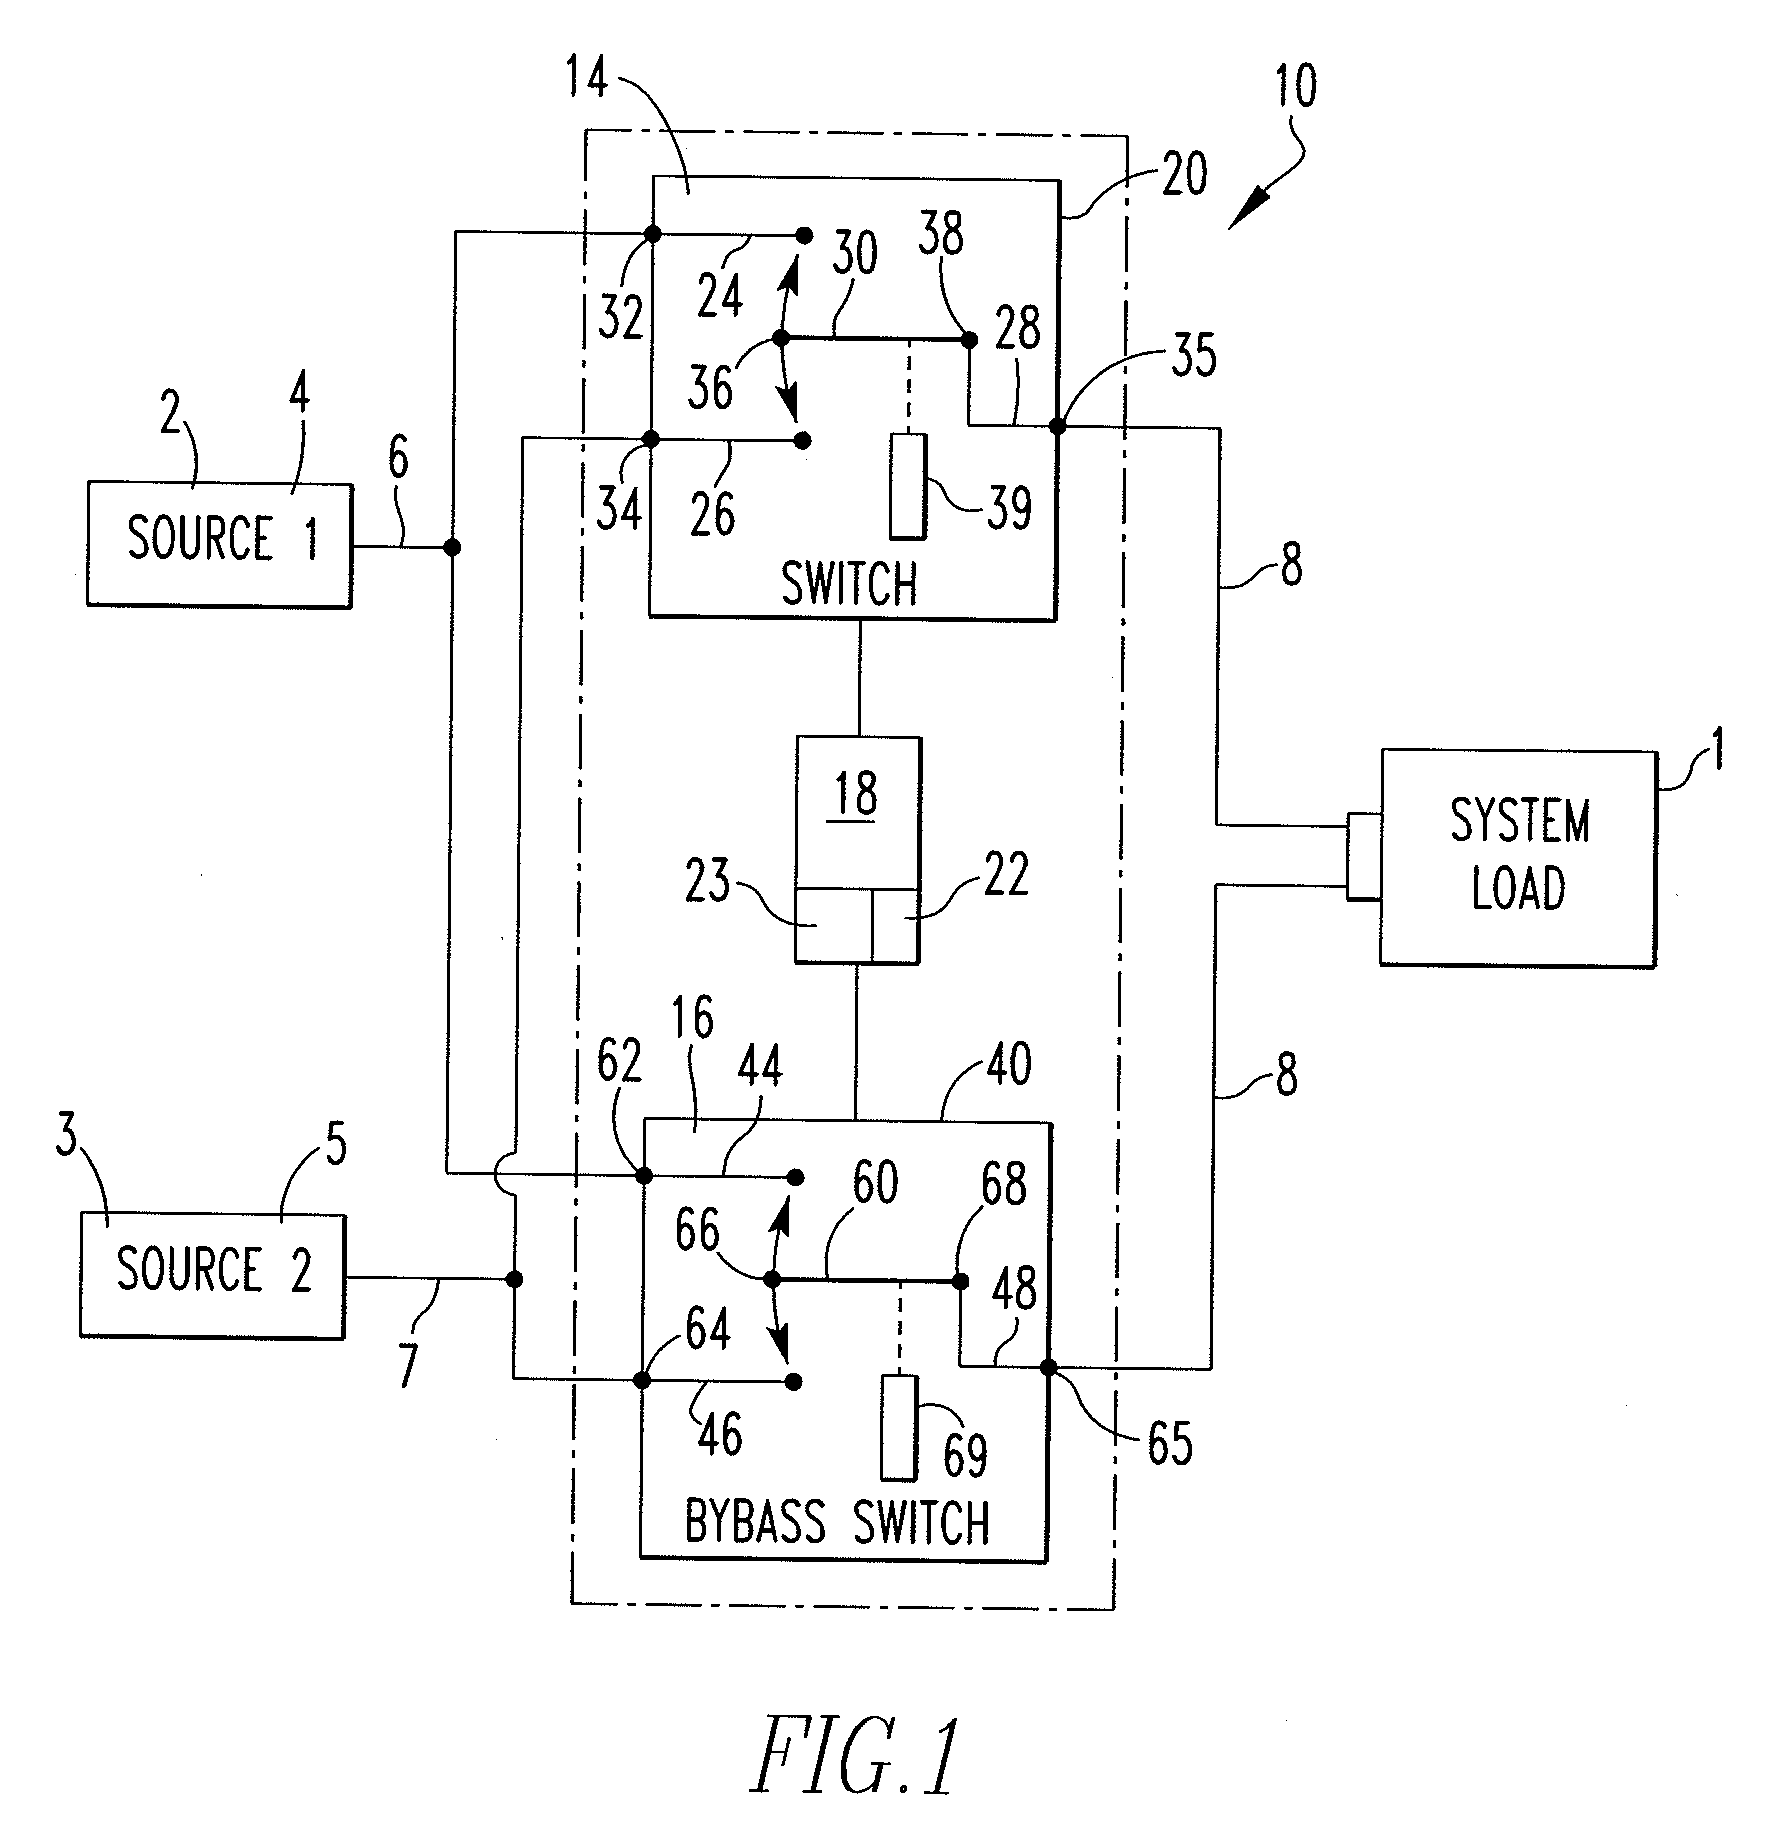 Neutral draw-out automatic transfer switch assembly and associated method